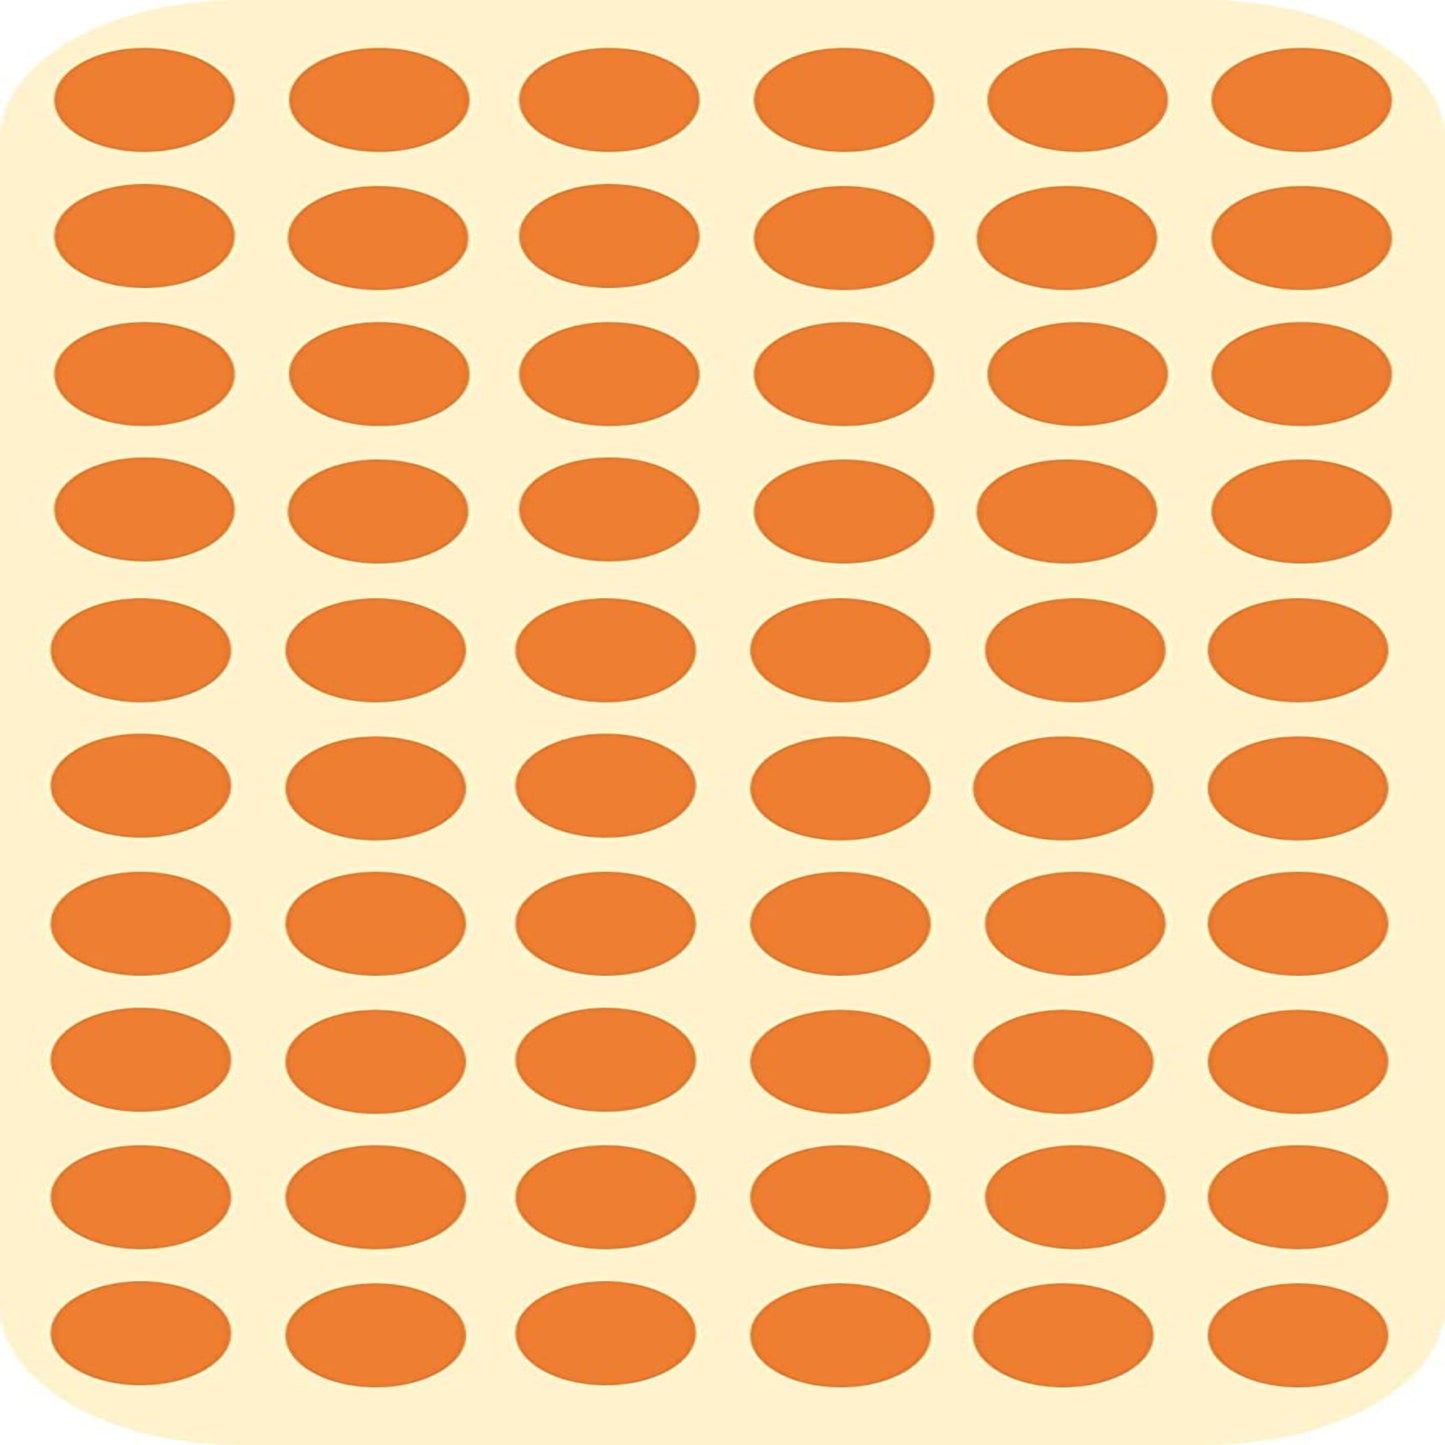 AccuPrints Orange Coloured Round Dots 10-mm or 1 cm or 0.37 inch Stickers for Art and Craft & Games